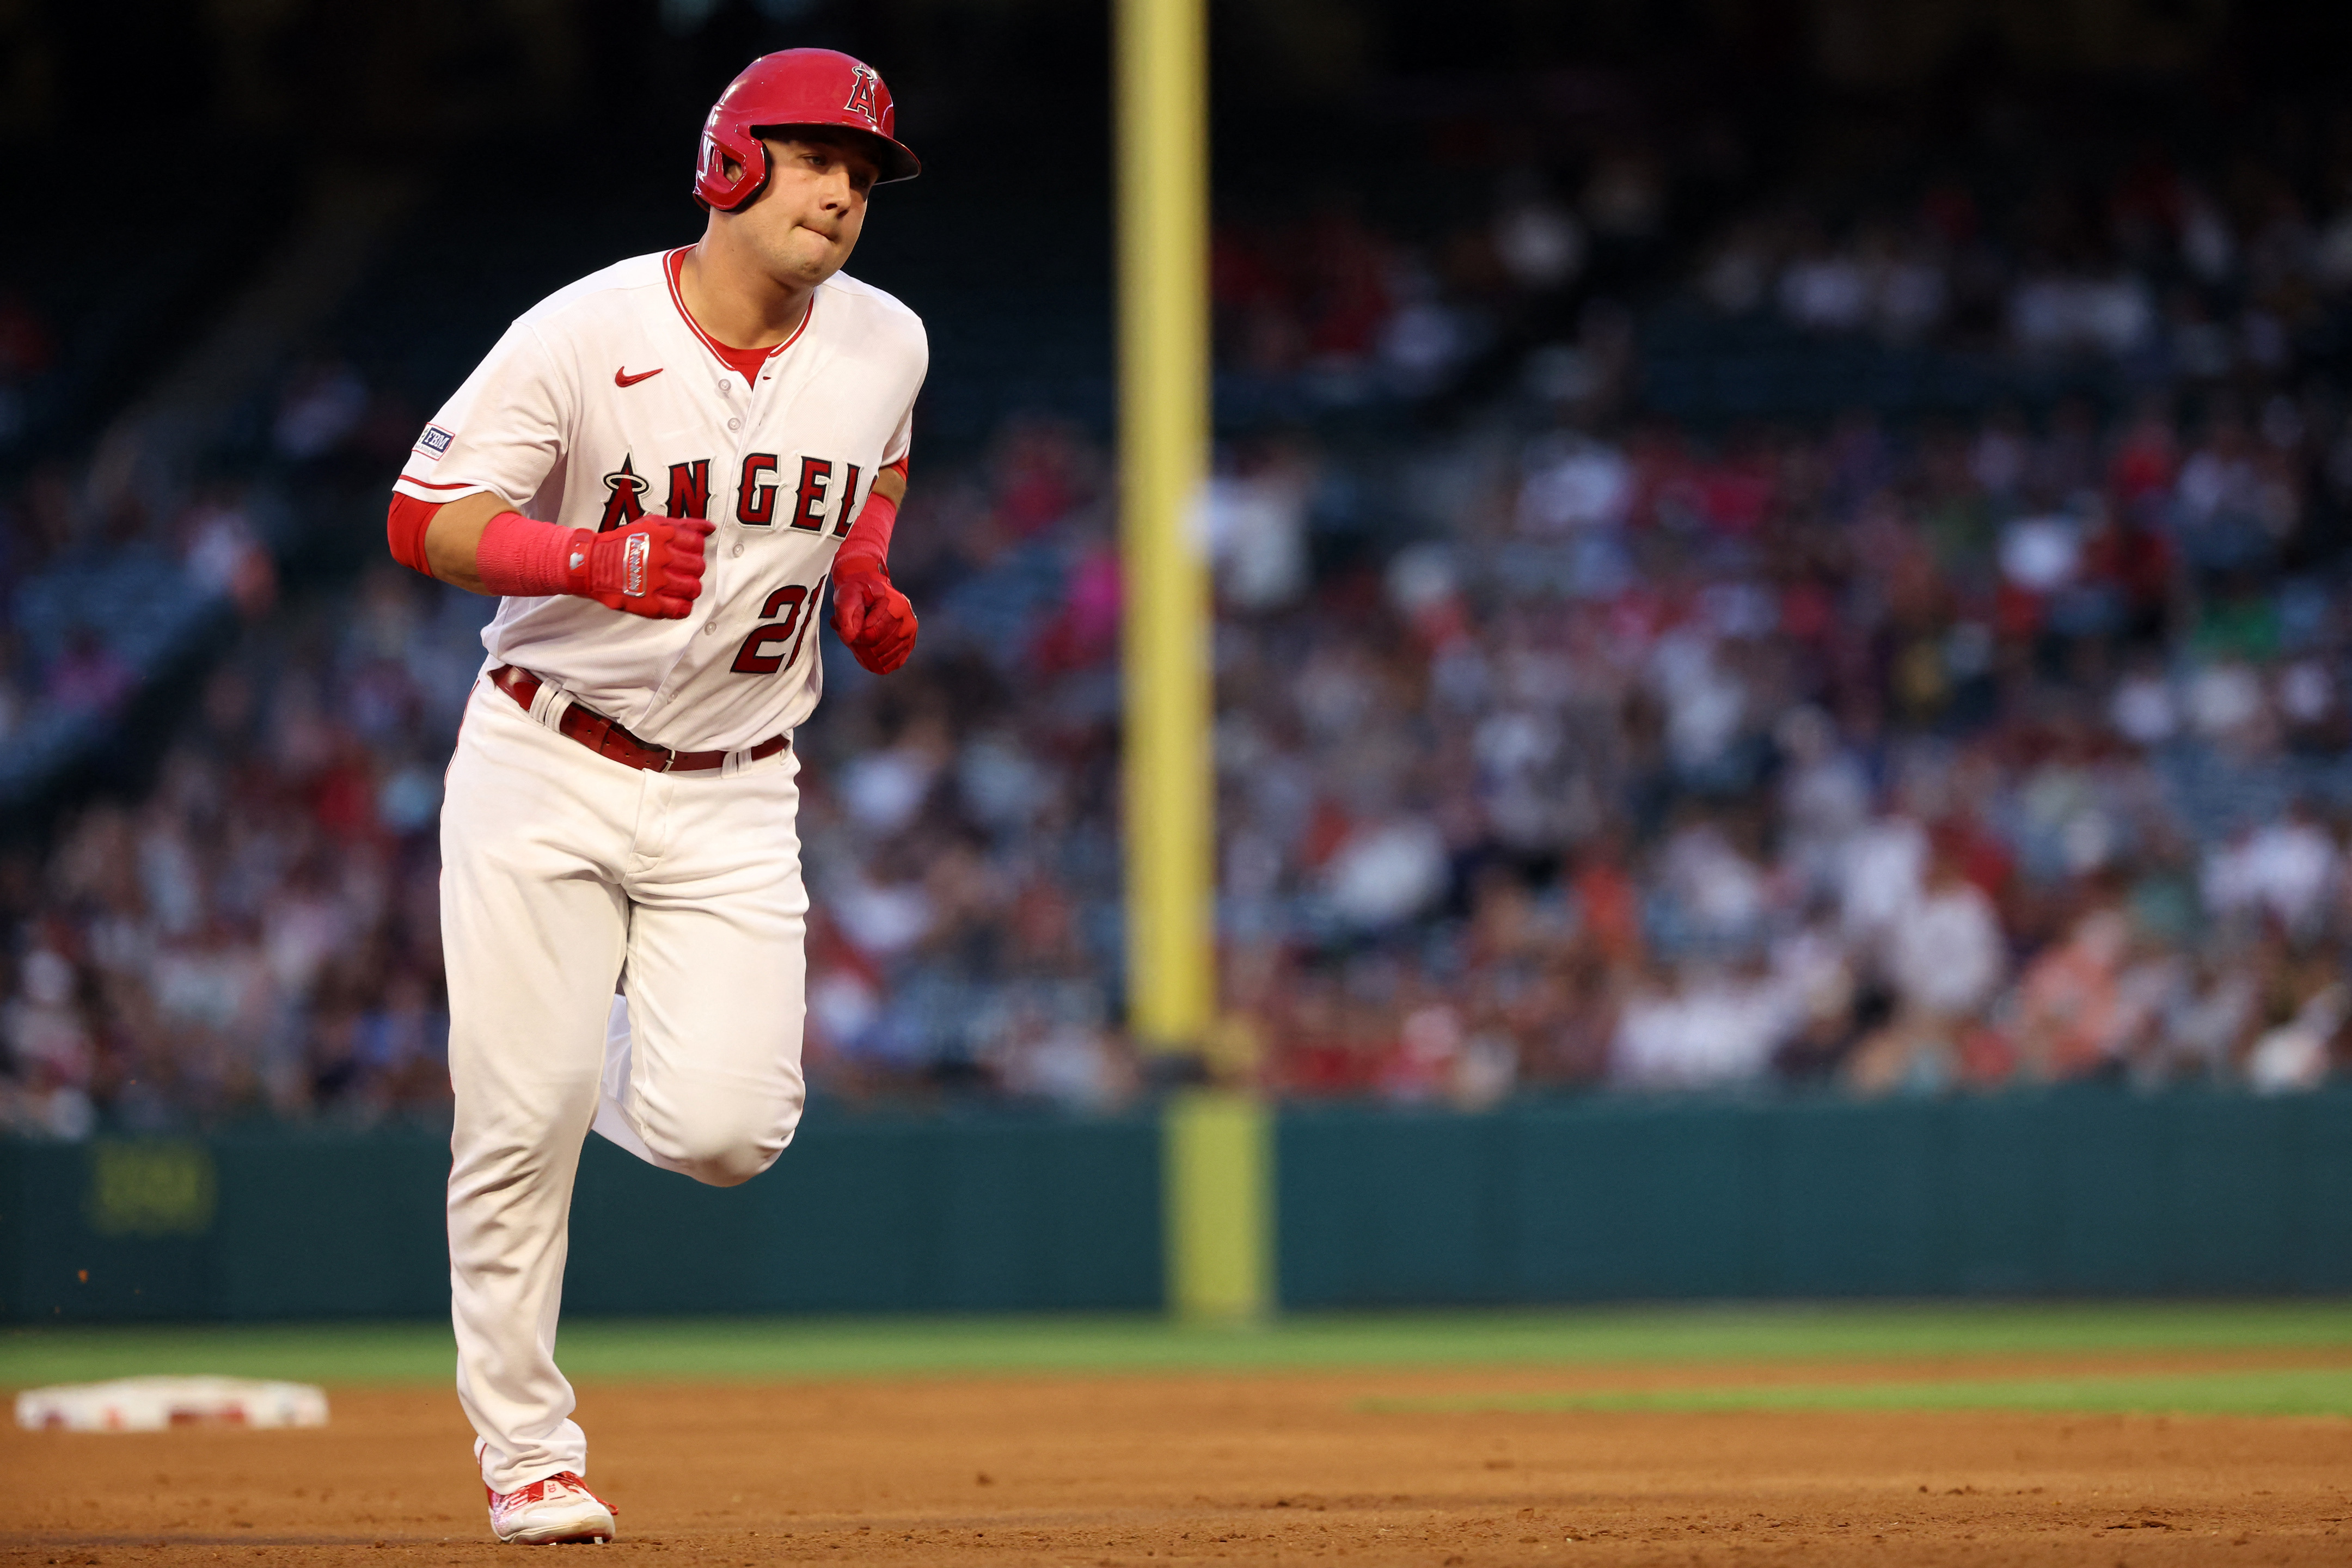 Angels ride four long balls in 6-2 win over Cleveland